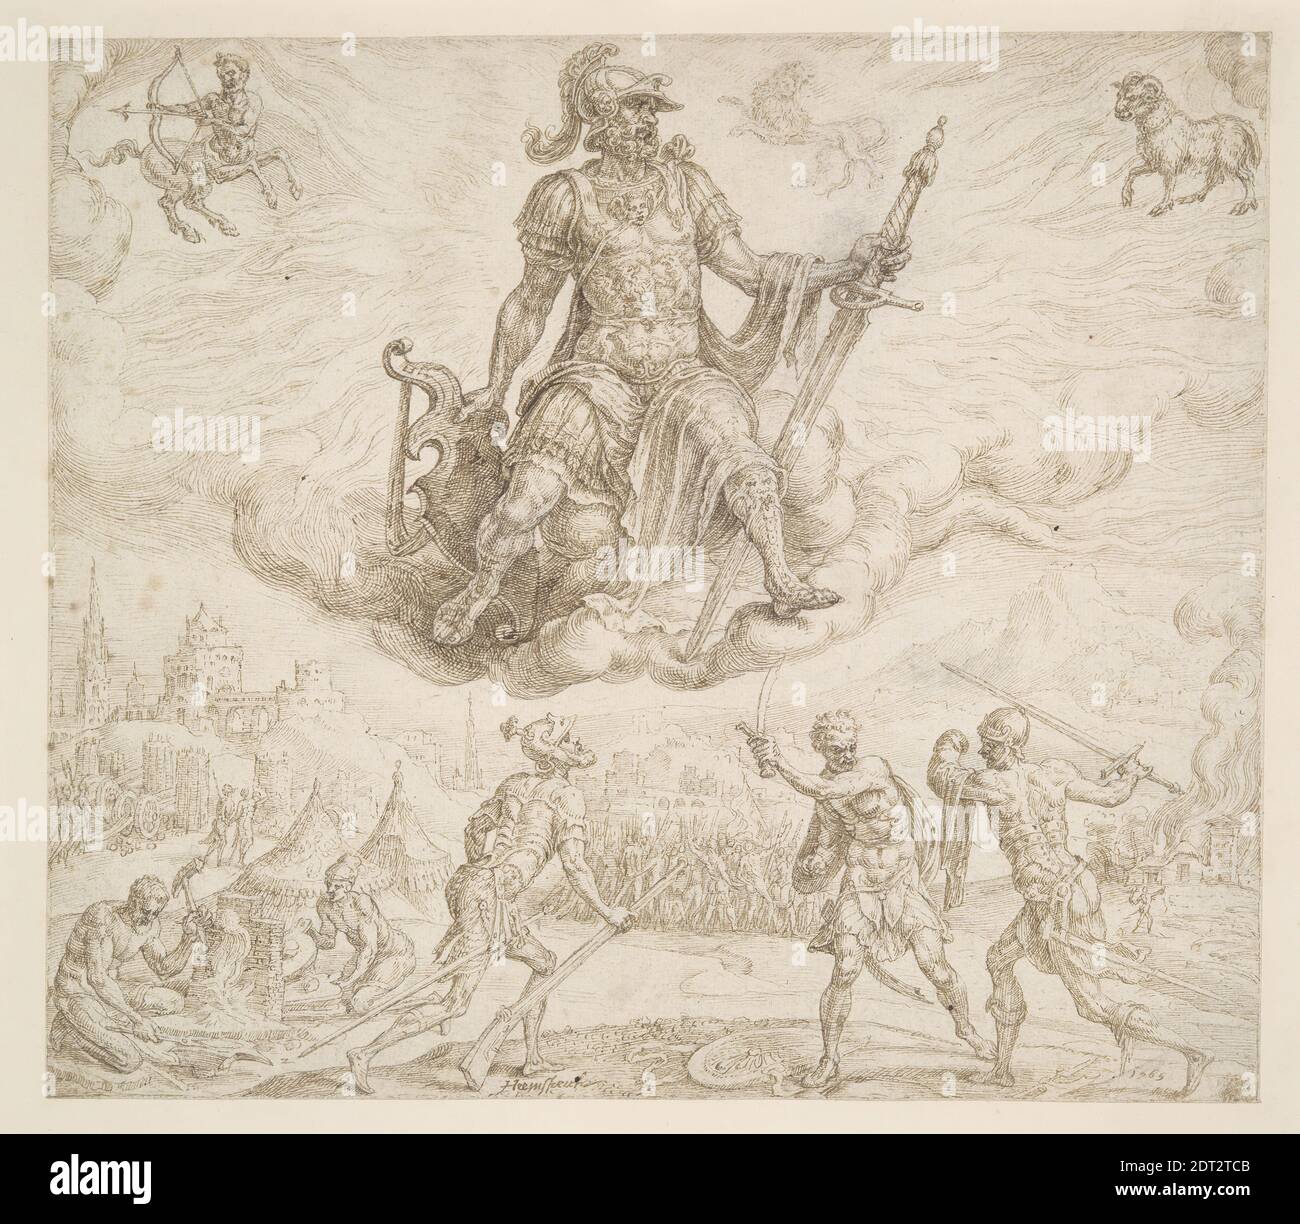 Artist: Maerten van Heemskerck, Dutch, 1498–1574, Mars, the Choleric Temperament, Pen and brown ink, traced for transfer, sheet: 21 × 24 cm (8 1/4 × 9 7/16 in.), Made in The Netherlands, Dutch, 16th century, Works on Paper - Drawings and Watercolors Stock Photo